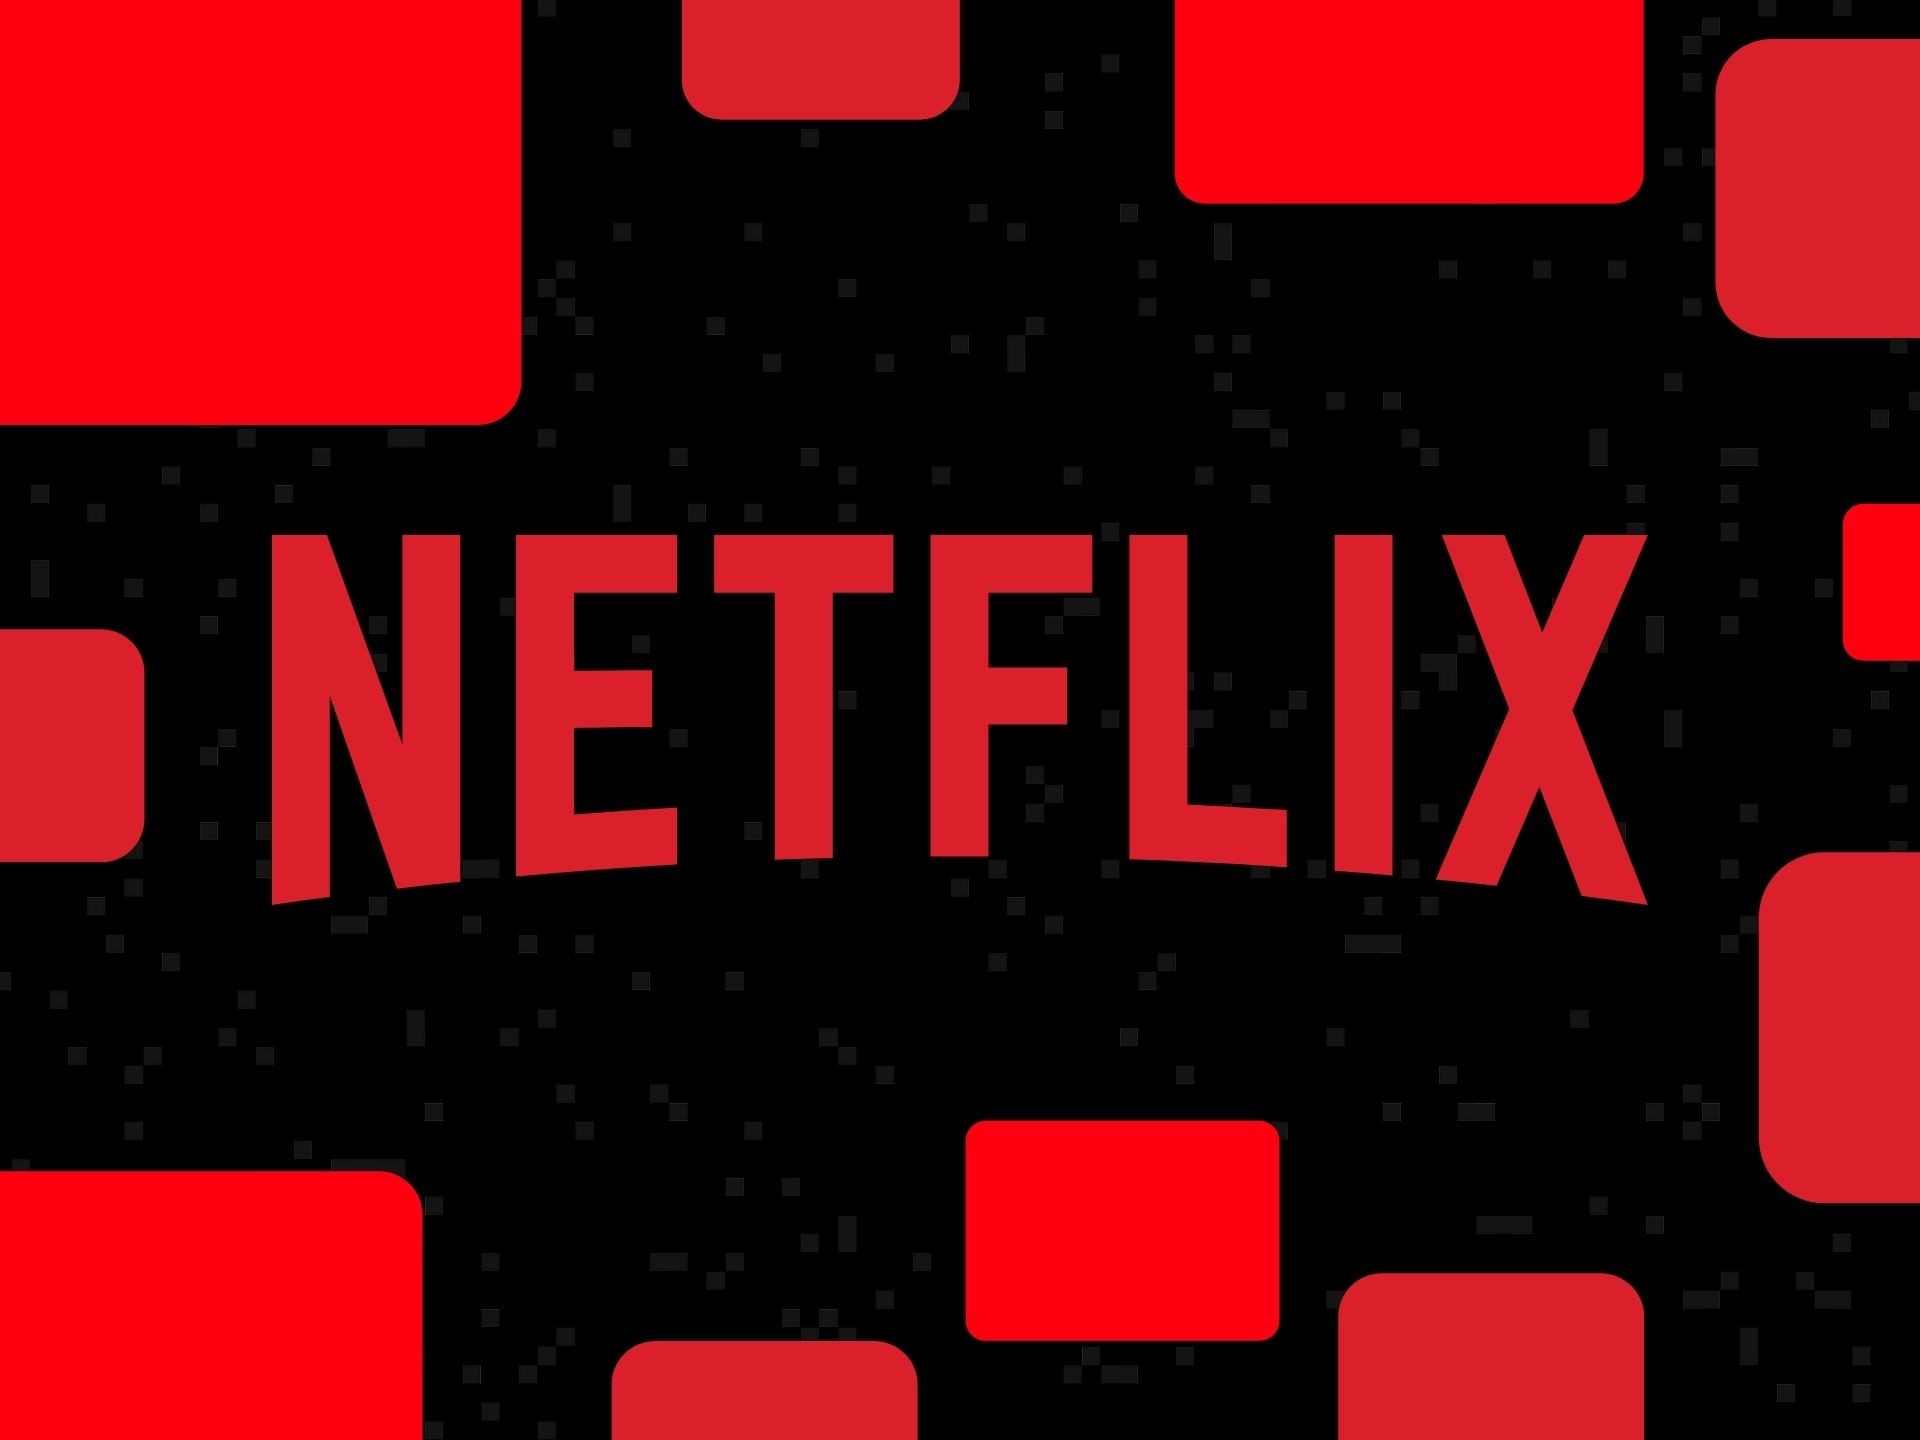 The recent Netflix changes are confusing and they might not stop the bleeding